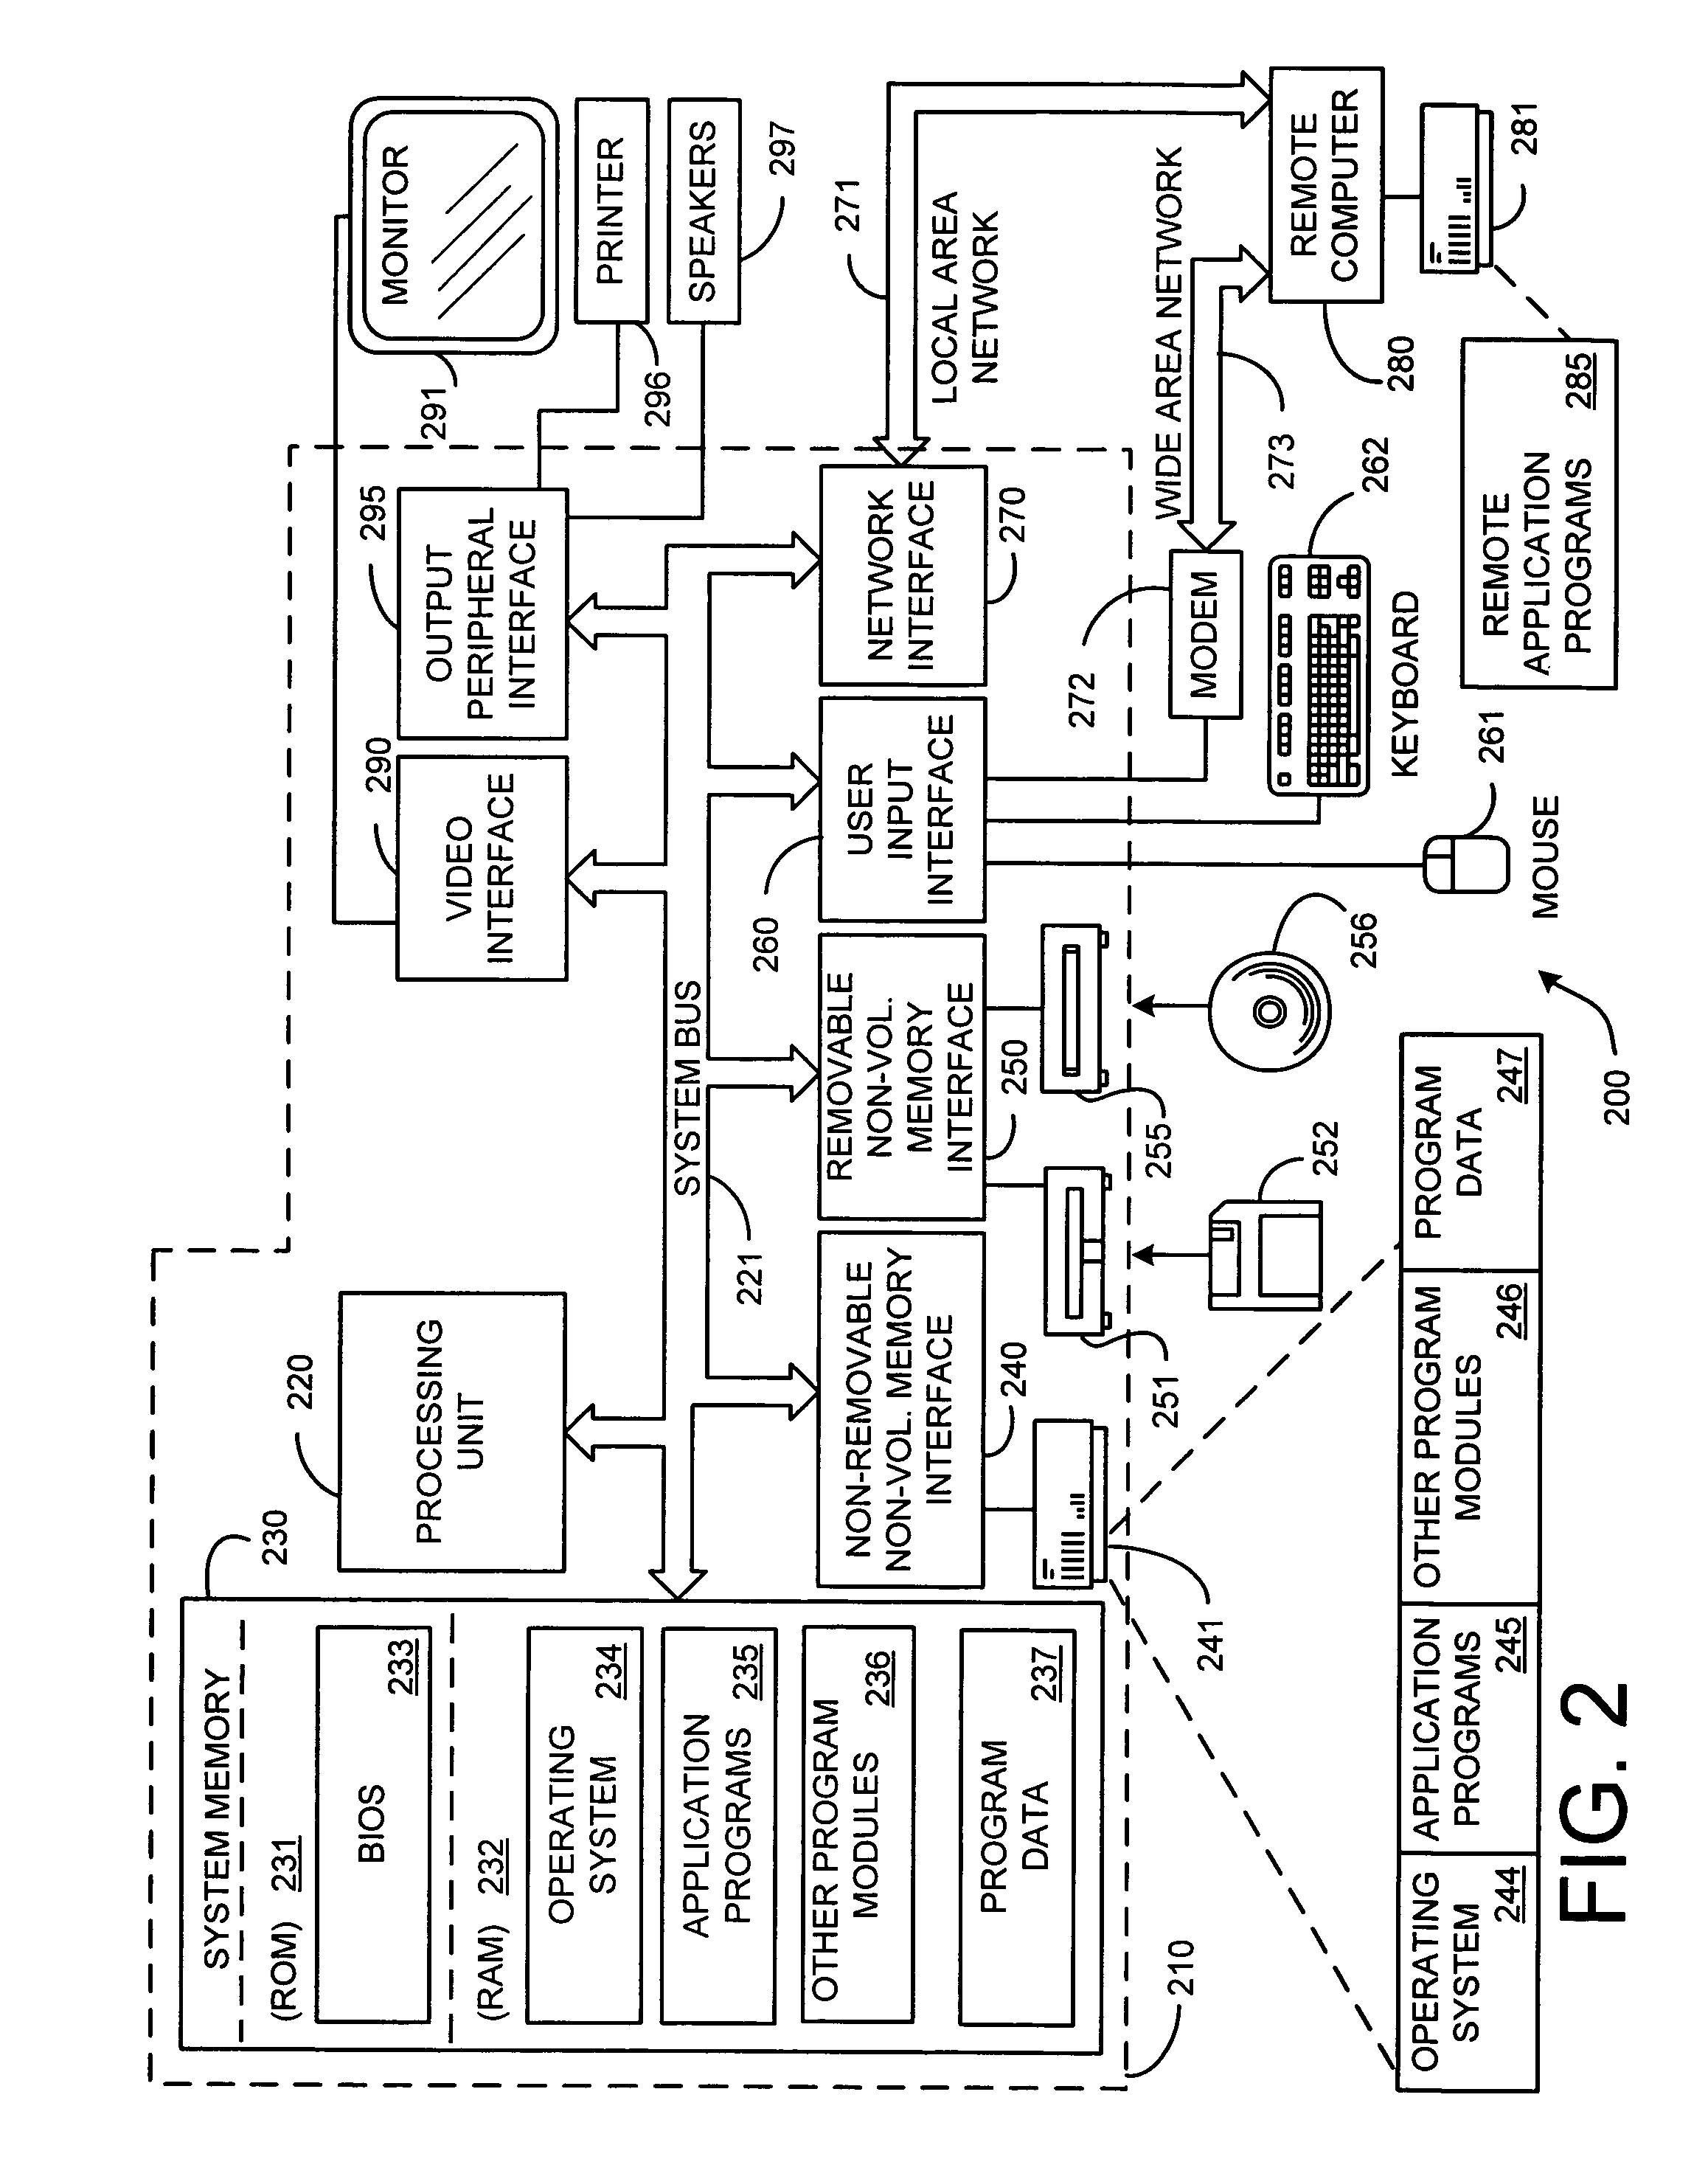 Automatic digital image grouping using criteria based on image metadata and spatial information